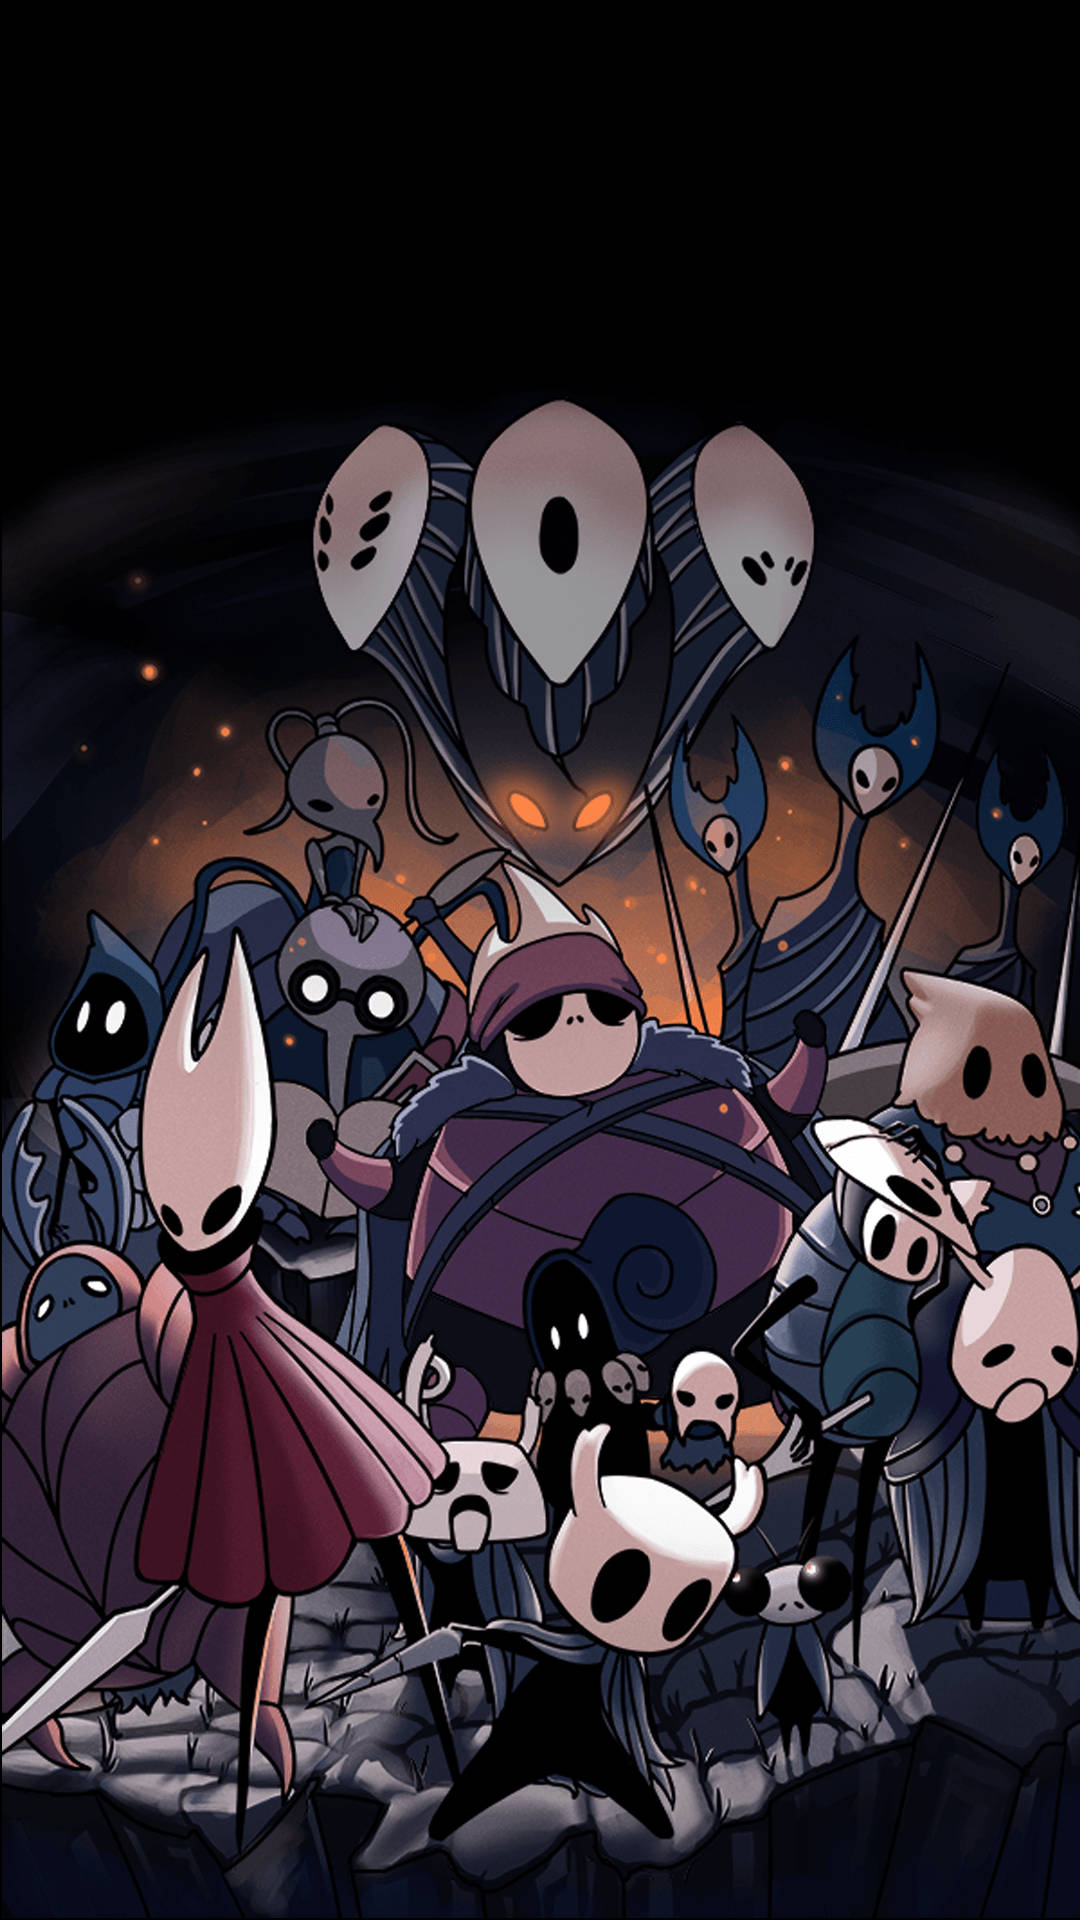 Cool Hd Characters Of Hollow Knight Wallpaper